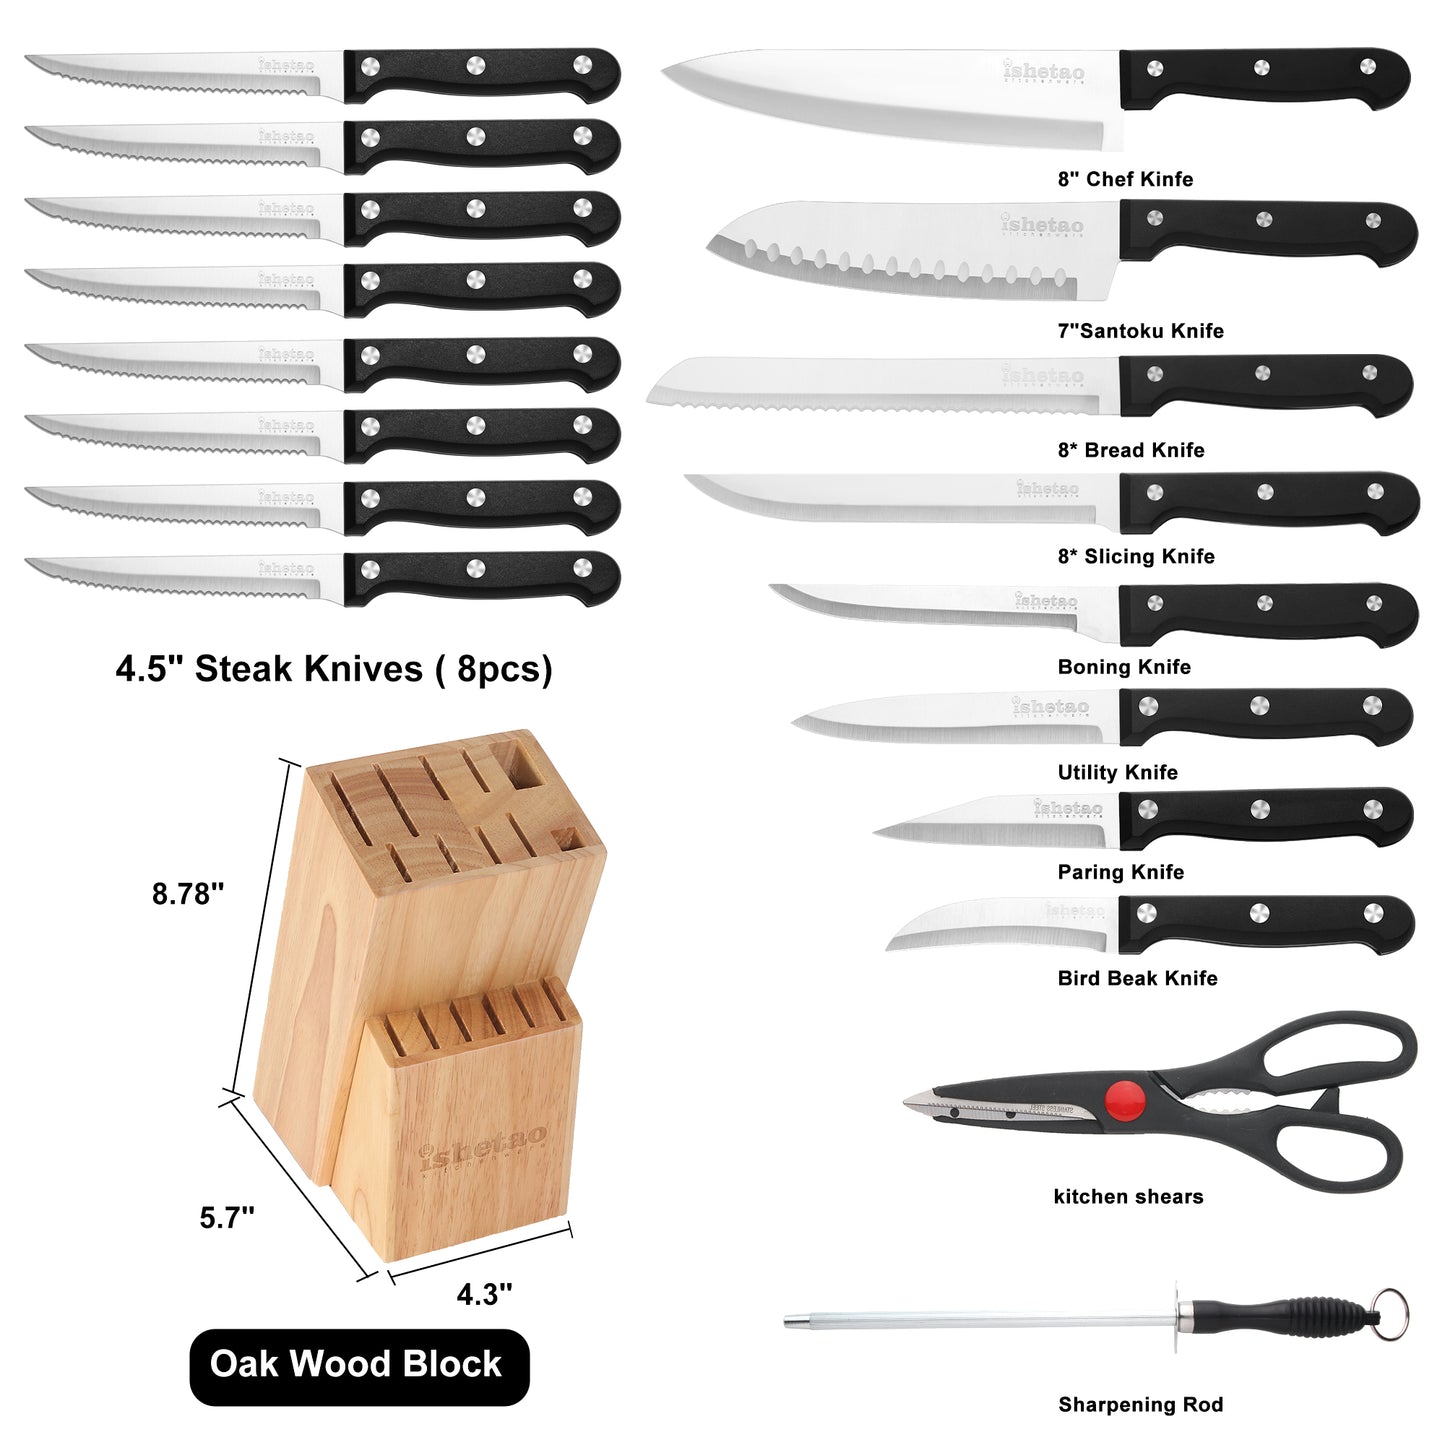 IsheTao 17-Piece Premium Kitchen Knife Set With Wooden Block, Triple-Riveted Serrated Knife Set, High Carbon Stainless Steel Knife Block Set, Kitchen Knives, Self-sharpening